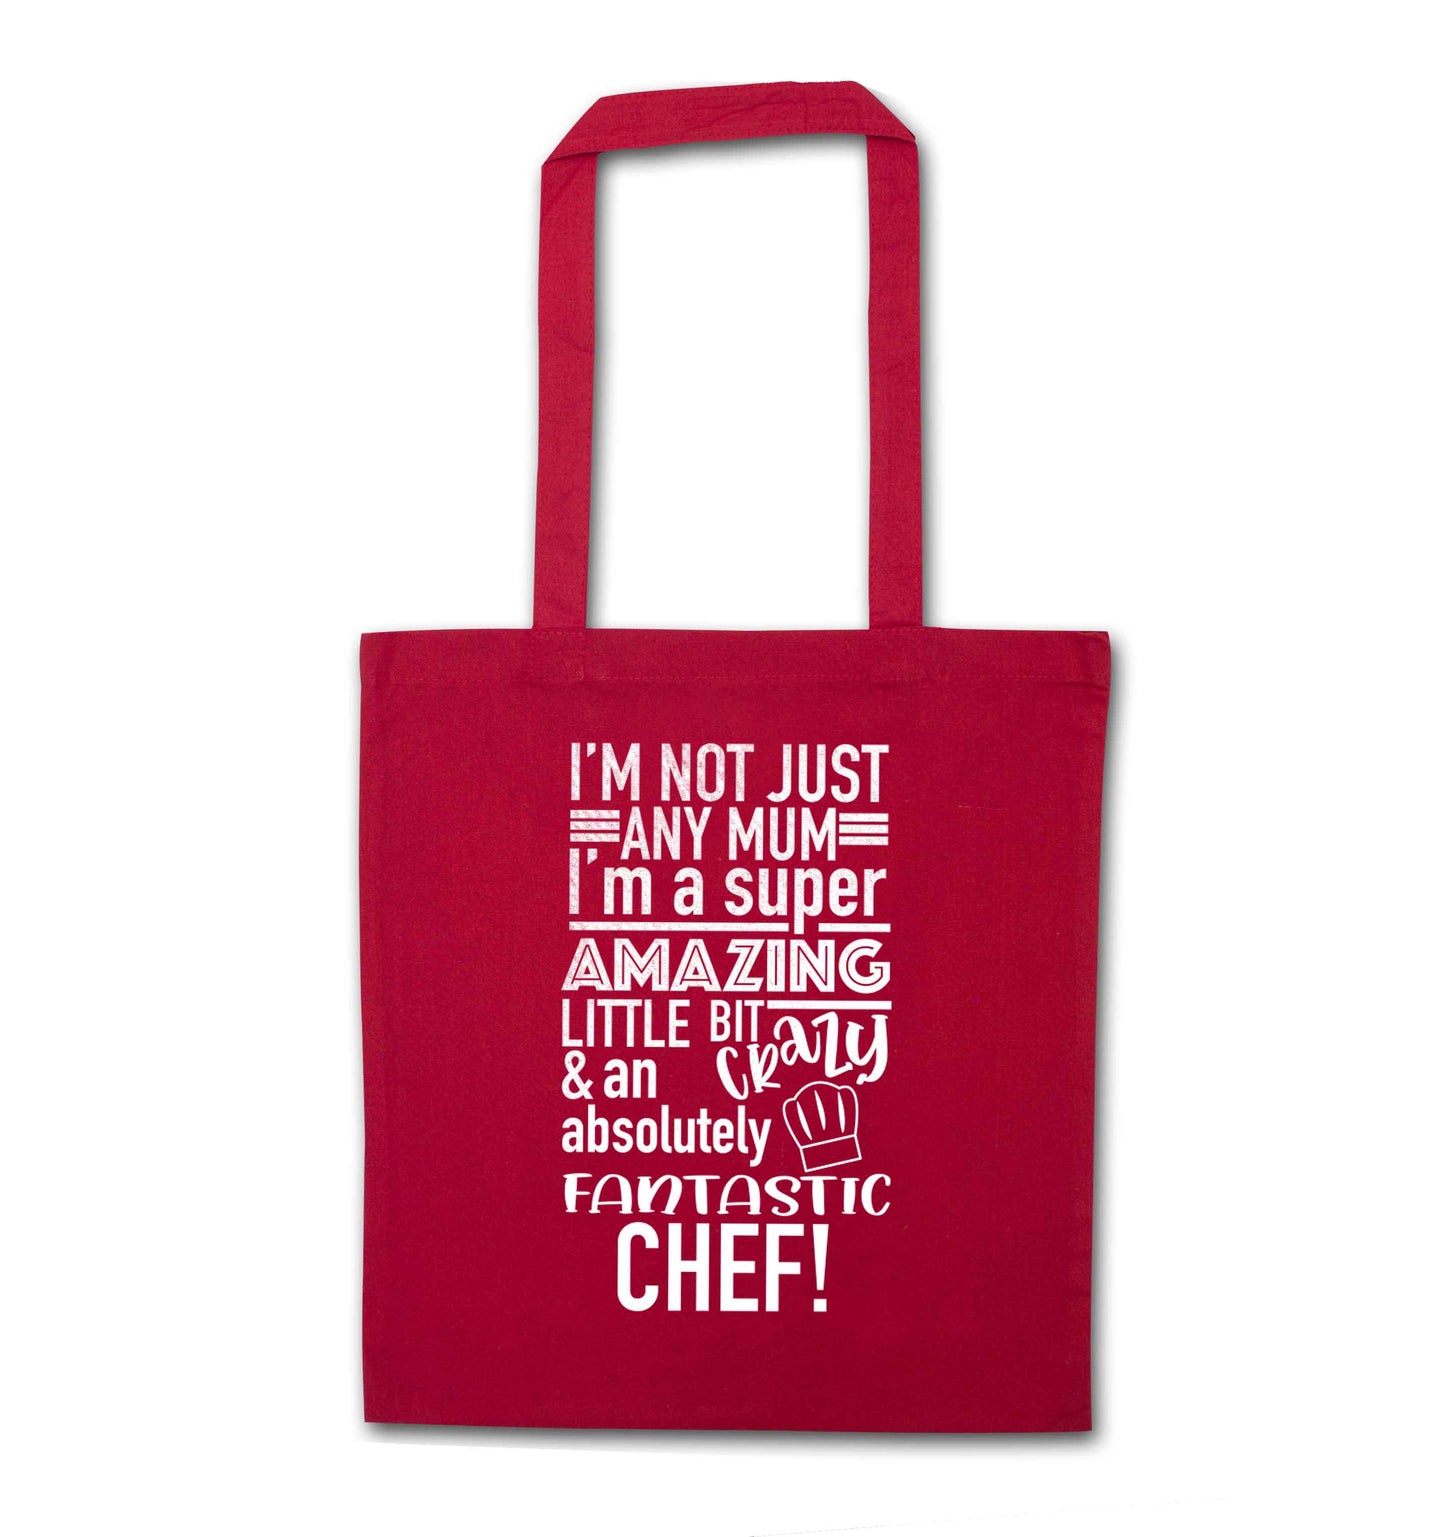 I'm not just any mum I'm a super amazing little bit crazy and an absolutely fantastic chef! red tote bag